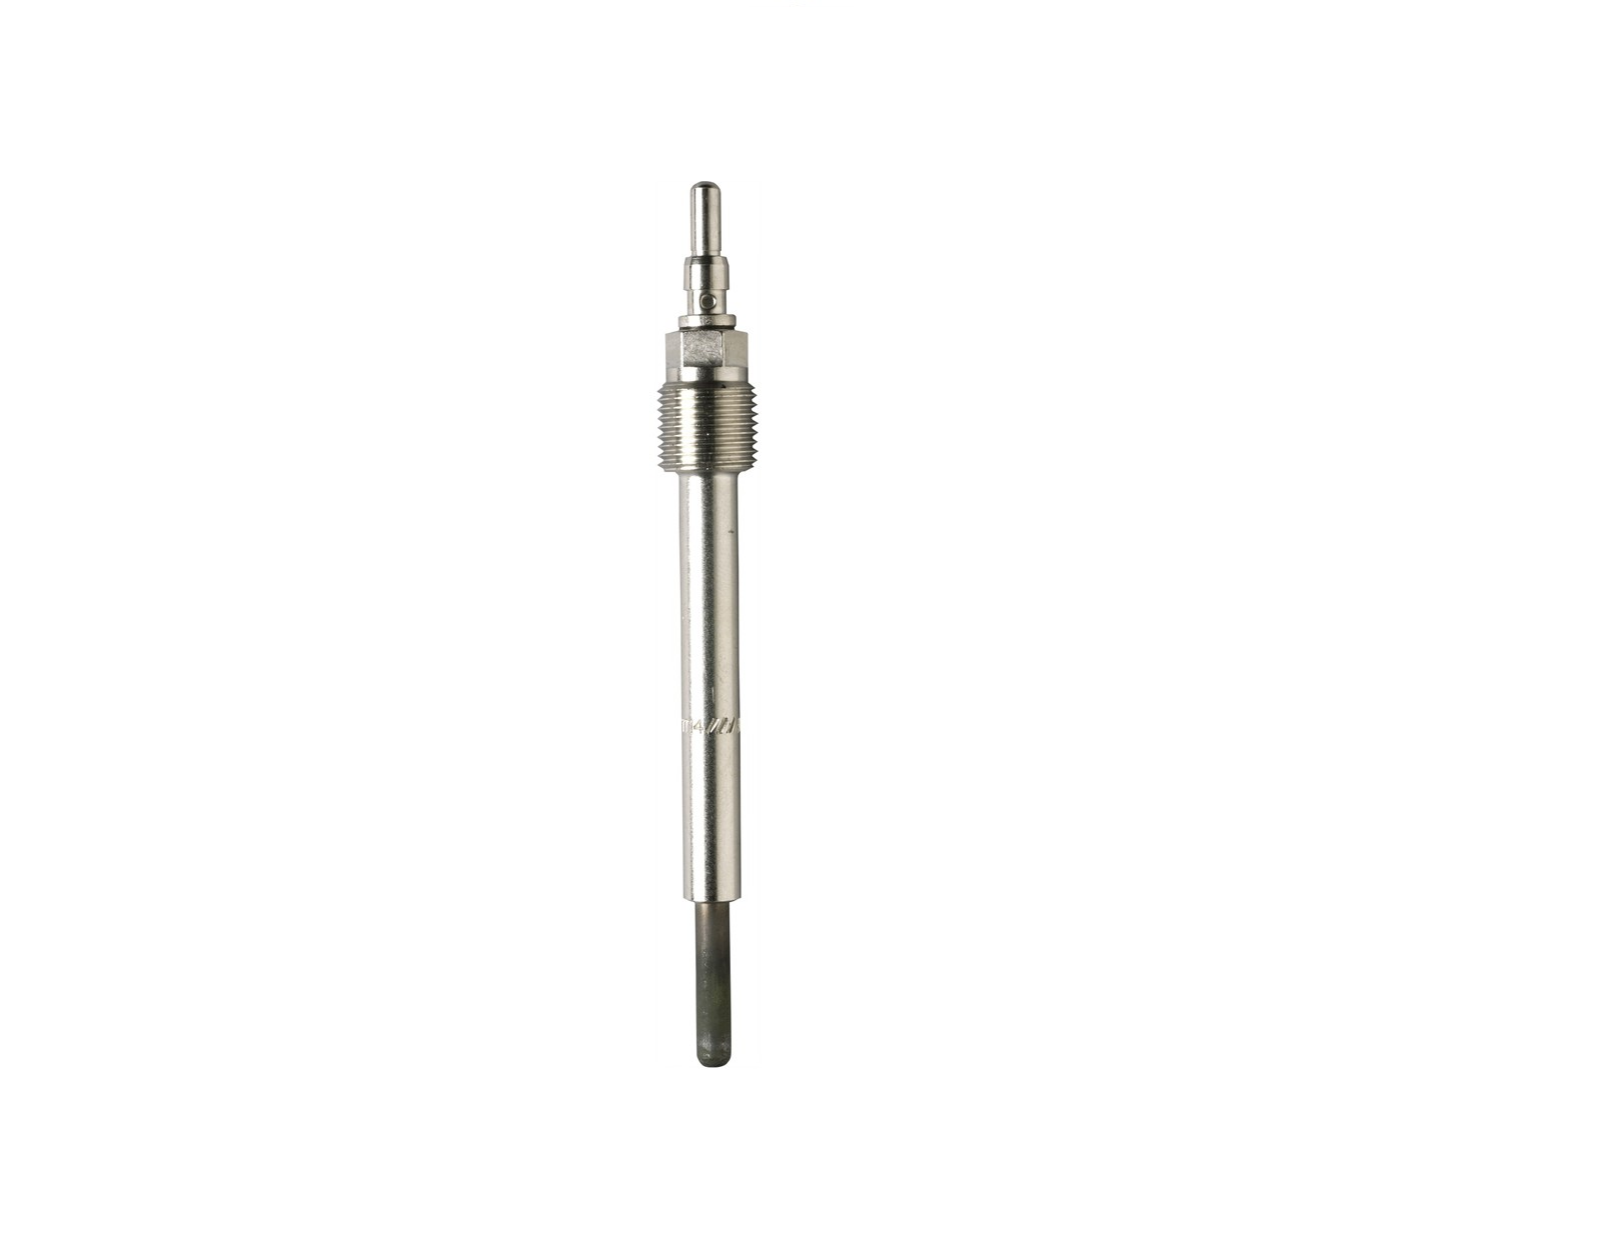 Ford Glow Plug 6.0 Powerstroke Production Date 9/24/03 After F250,F350,F350,F450, F550 